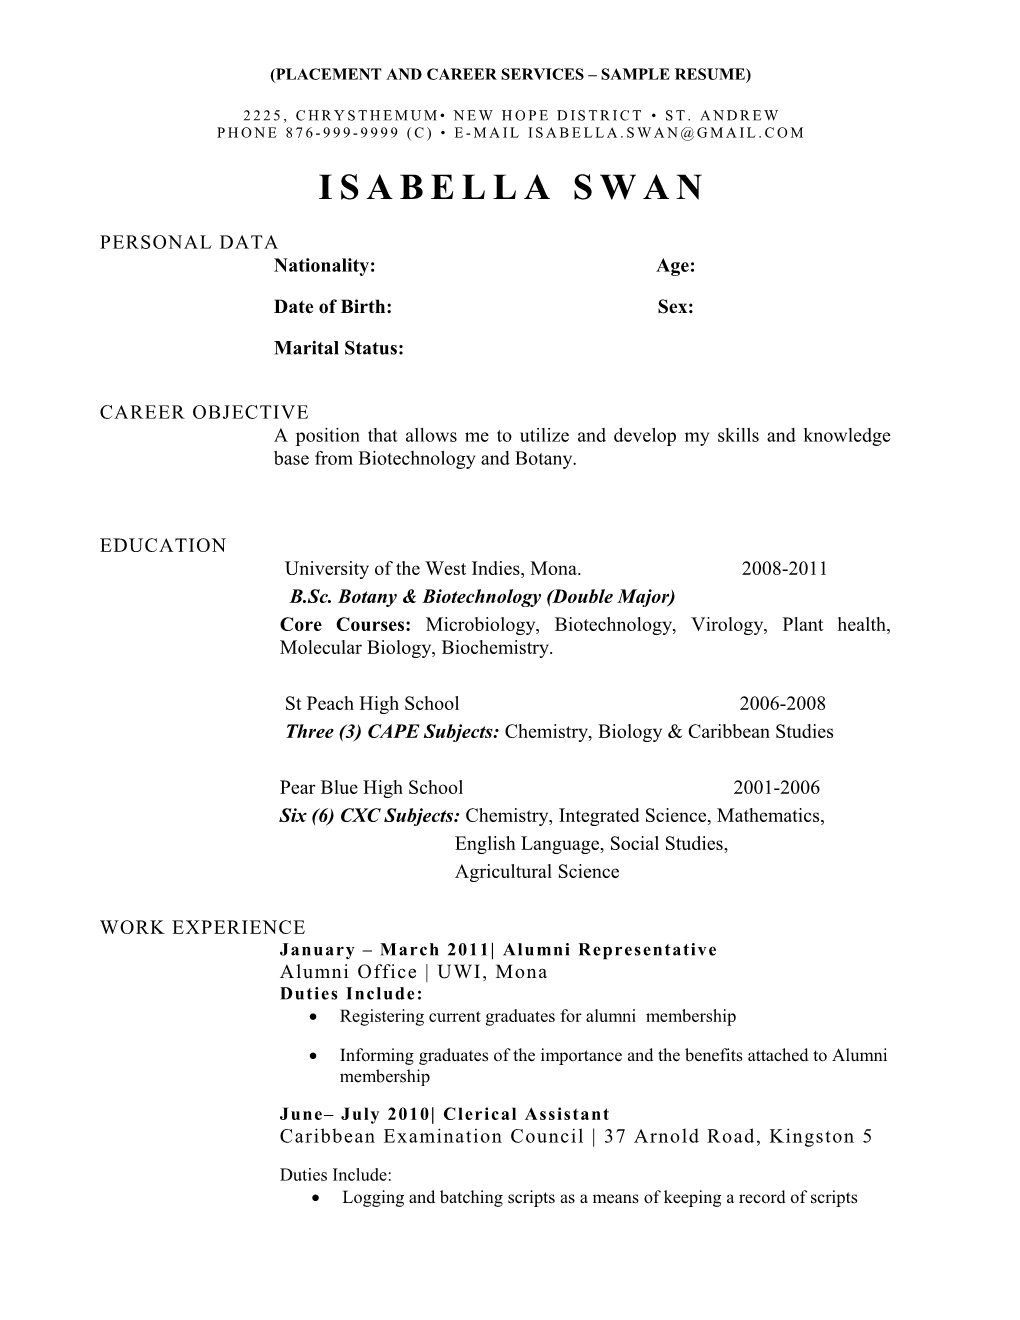 Placement and Career Services Sample Resume